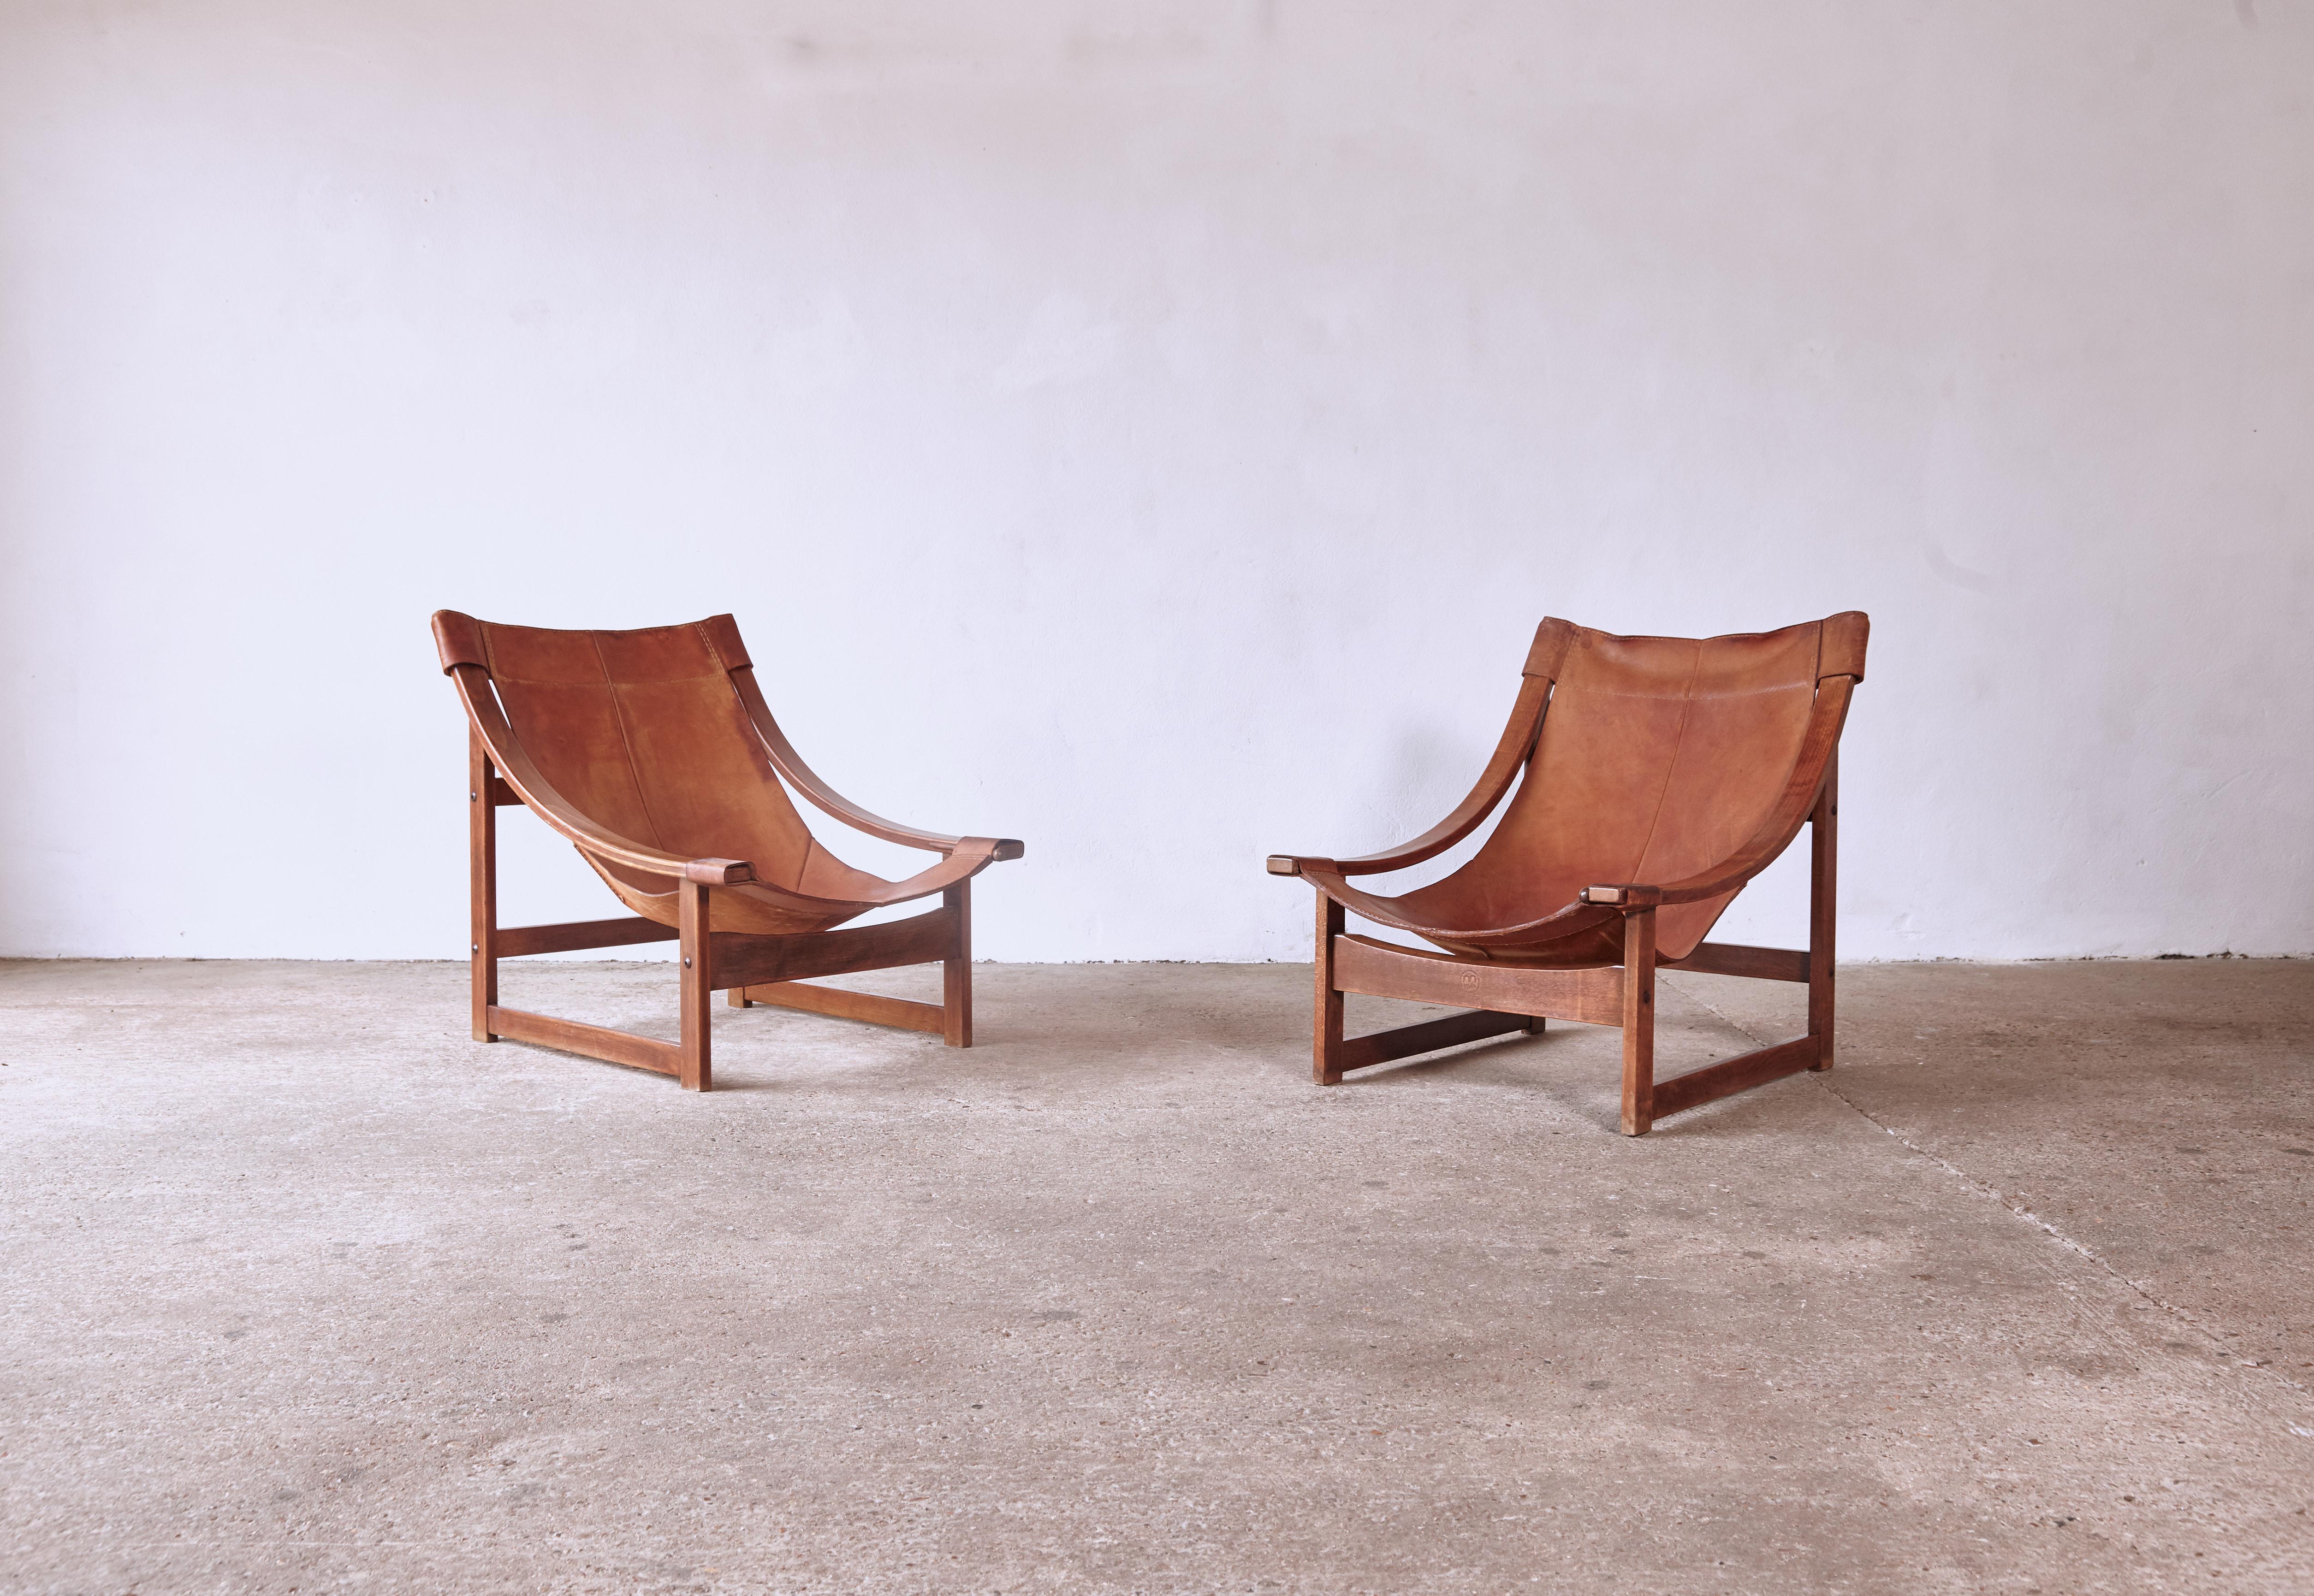 Superb and very rare Vicente Sánchez Pablos walnut and leather lounge chairs produced by Manufacturas Artesanas, Spain, 1960s. Original condition. Incredible patina. Ships worldwide.



UK customers please note displayed prices are exclusive of